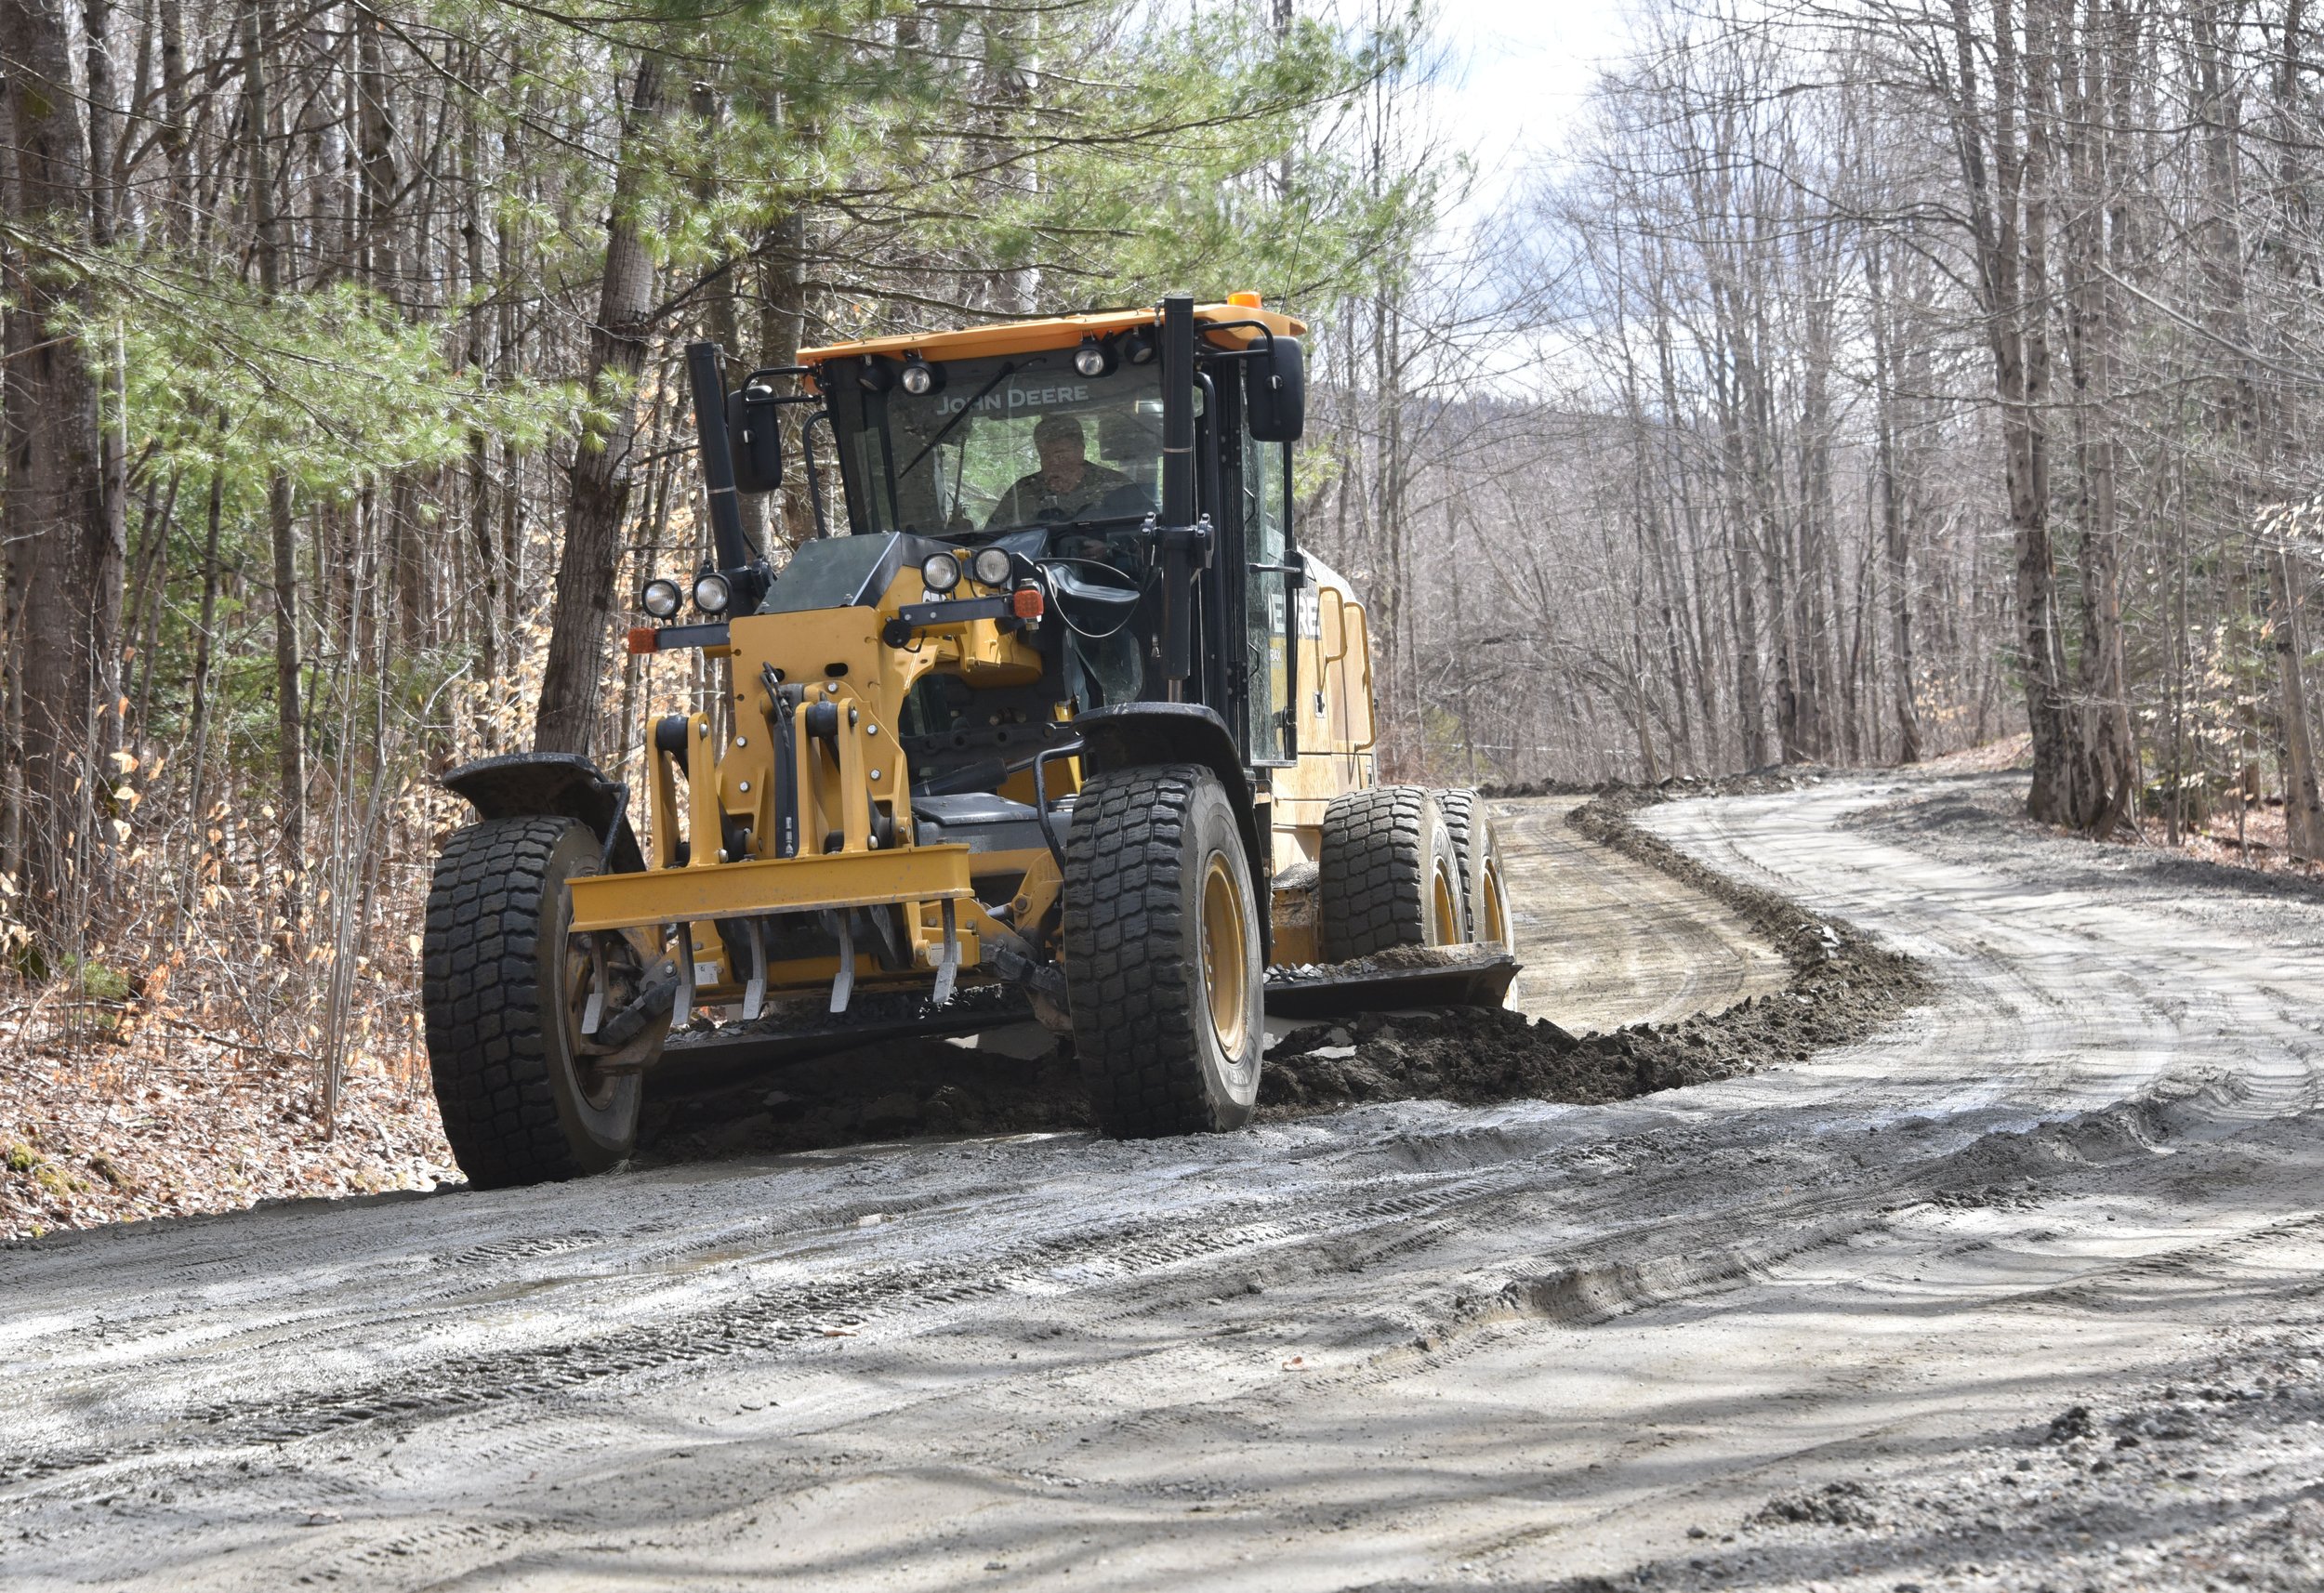  Help is on the way. Grading is under way as town road crews work to scrape and fill ruts and return roads to passable condition. This grader works on Valley View Road. Photo by Gordon Miller 